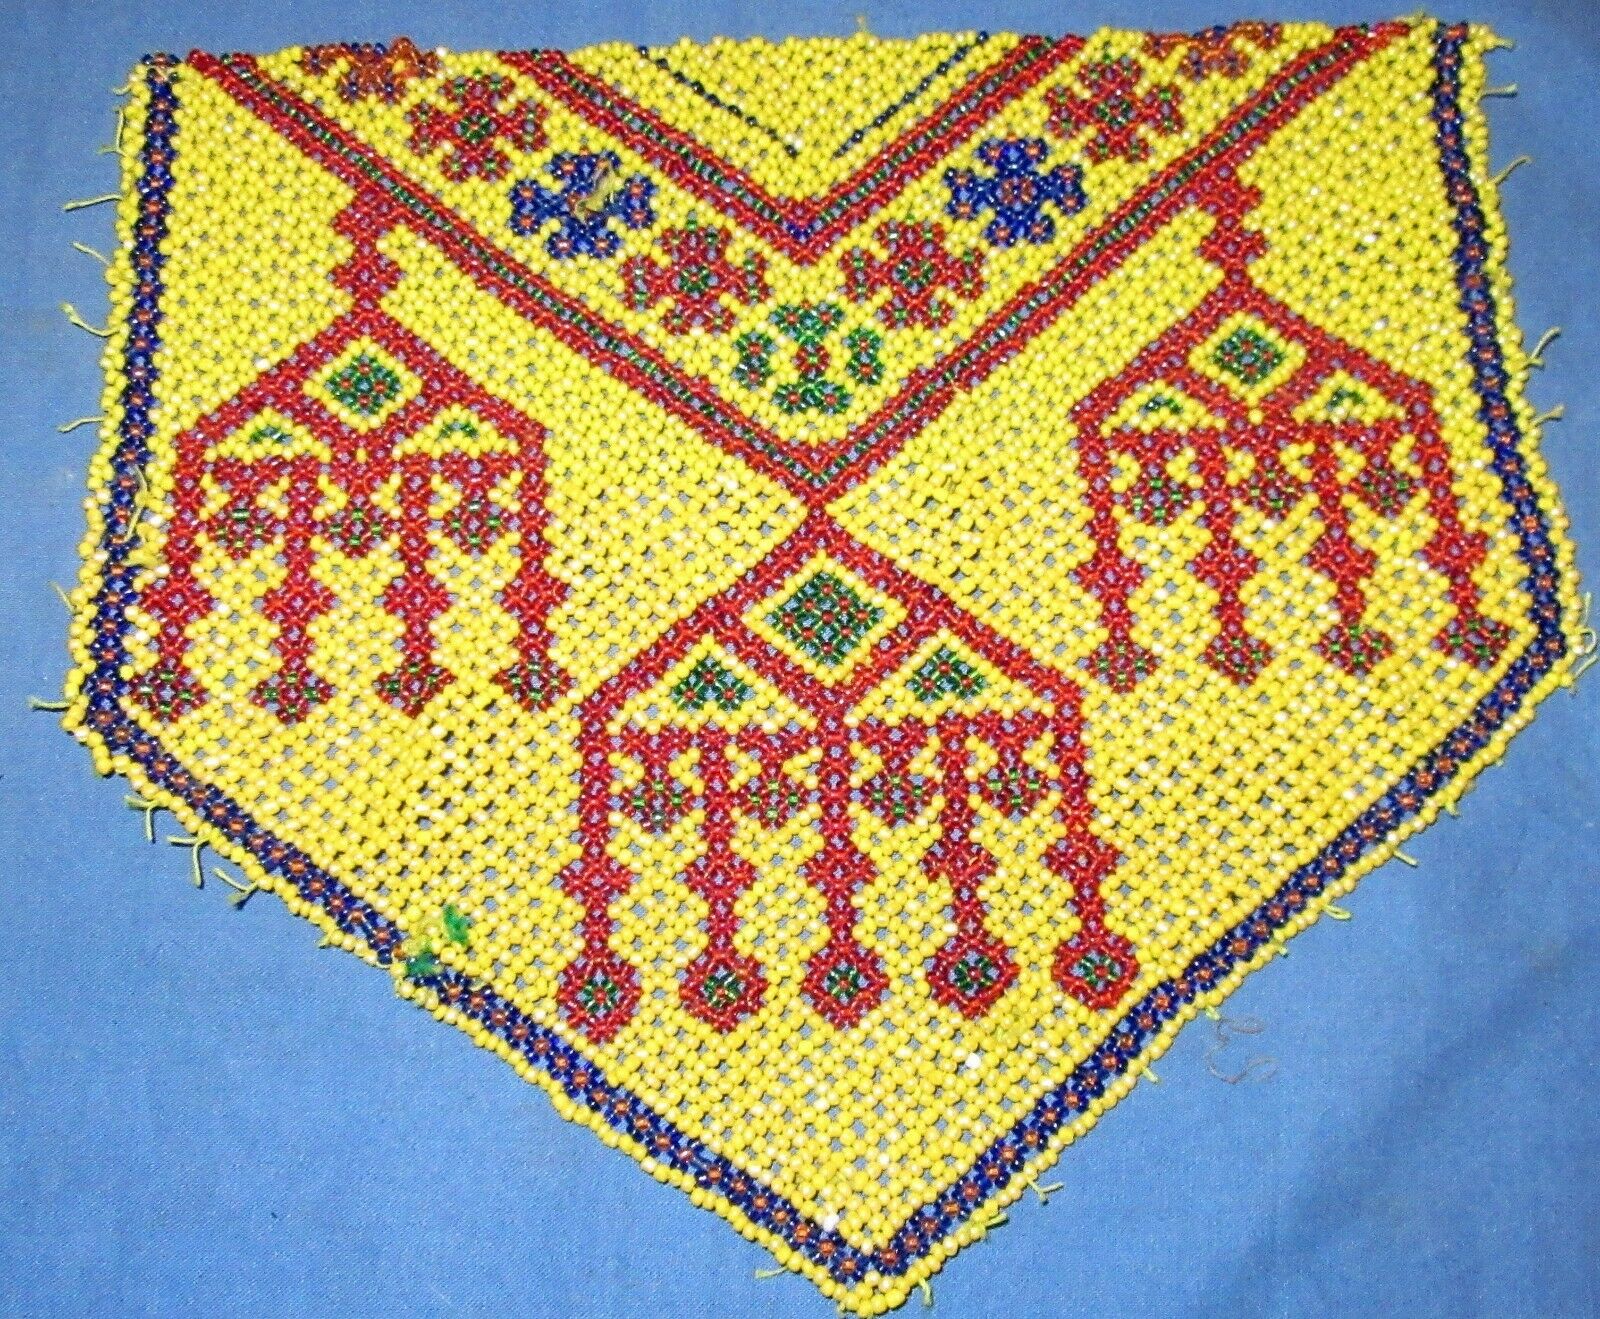 Remnants Patch Medallion Beaded Afghan Kuchi Tribal Sewing Art Crafts 10"